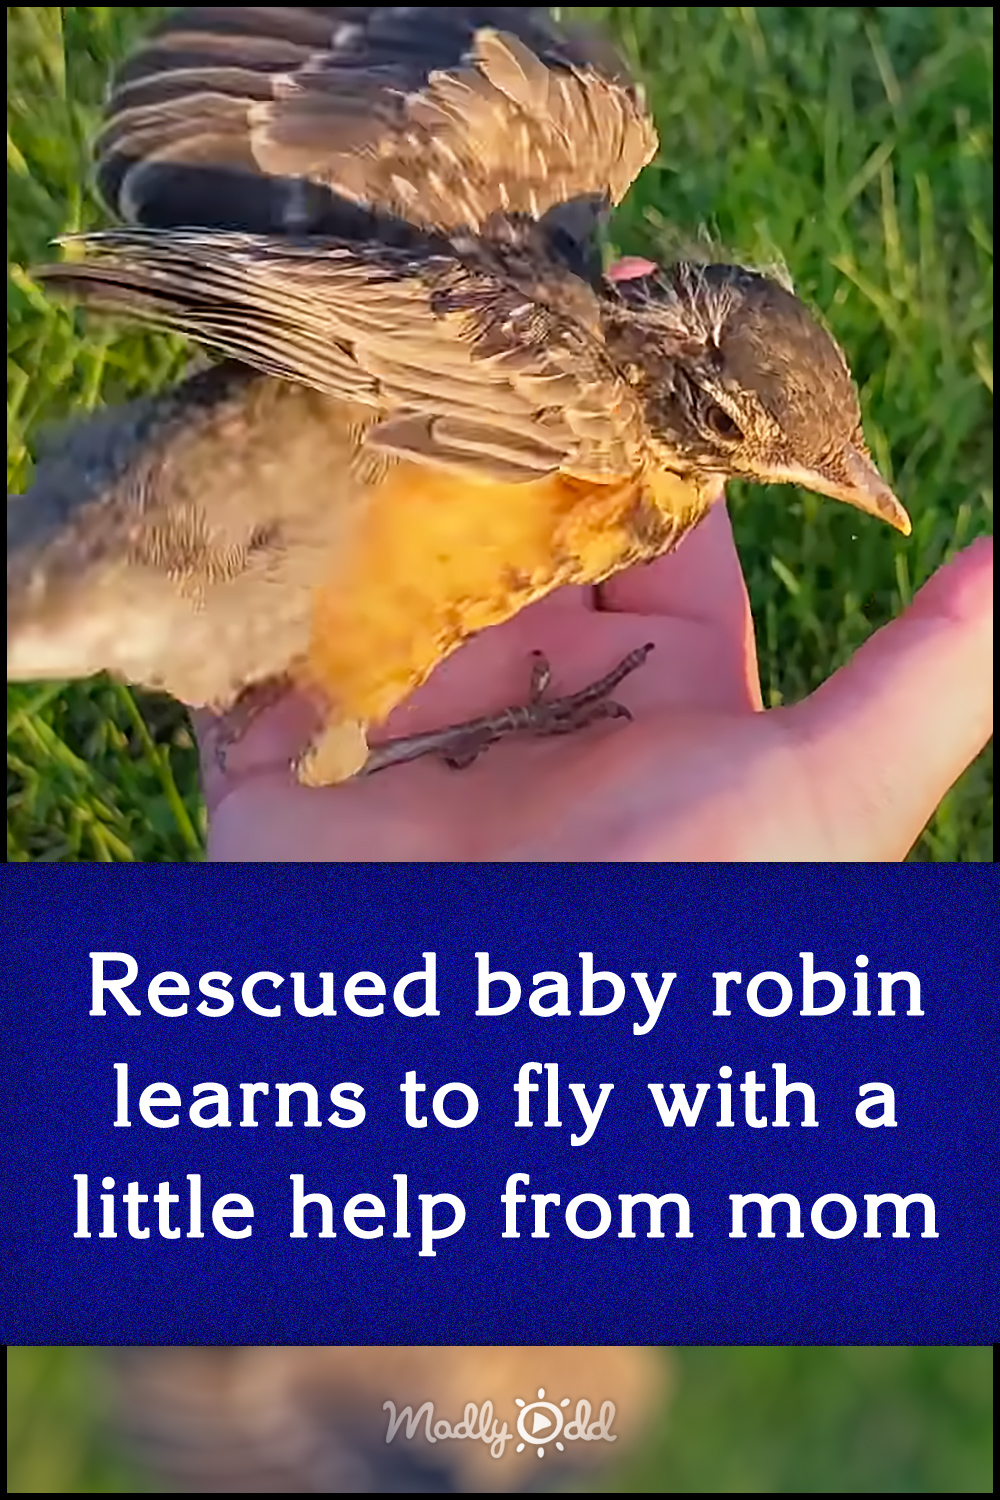 Rescued baby robin learns to fly with a little help from mom